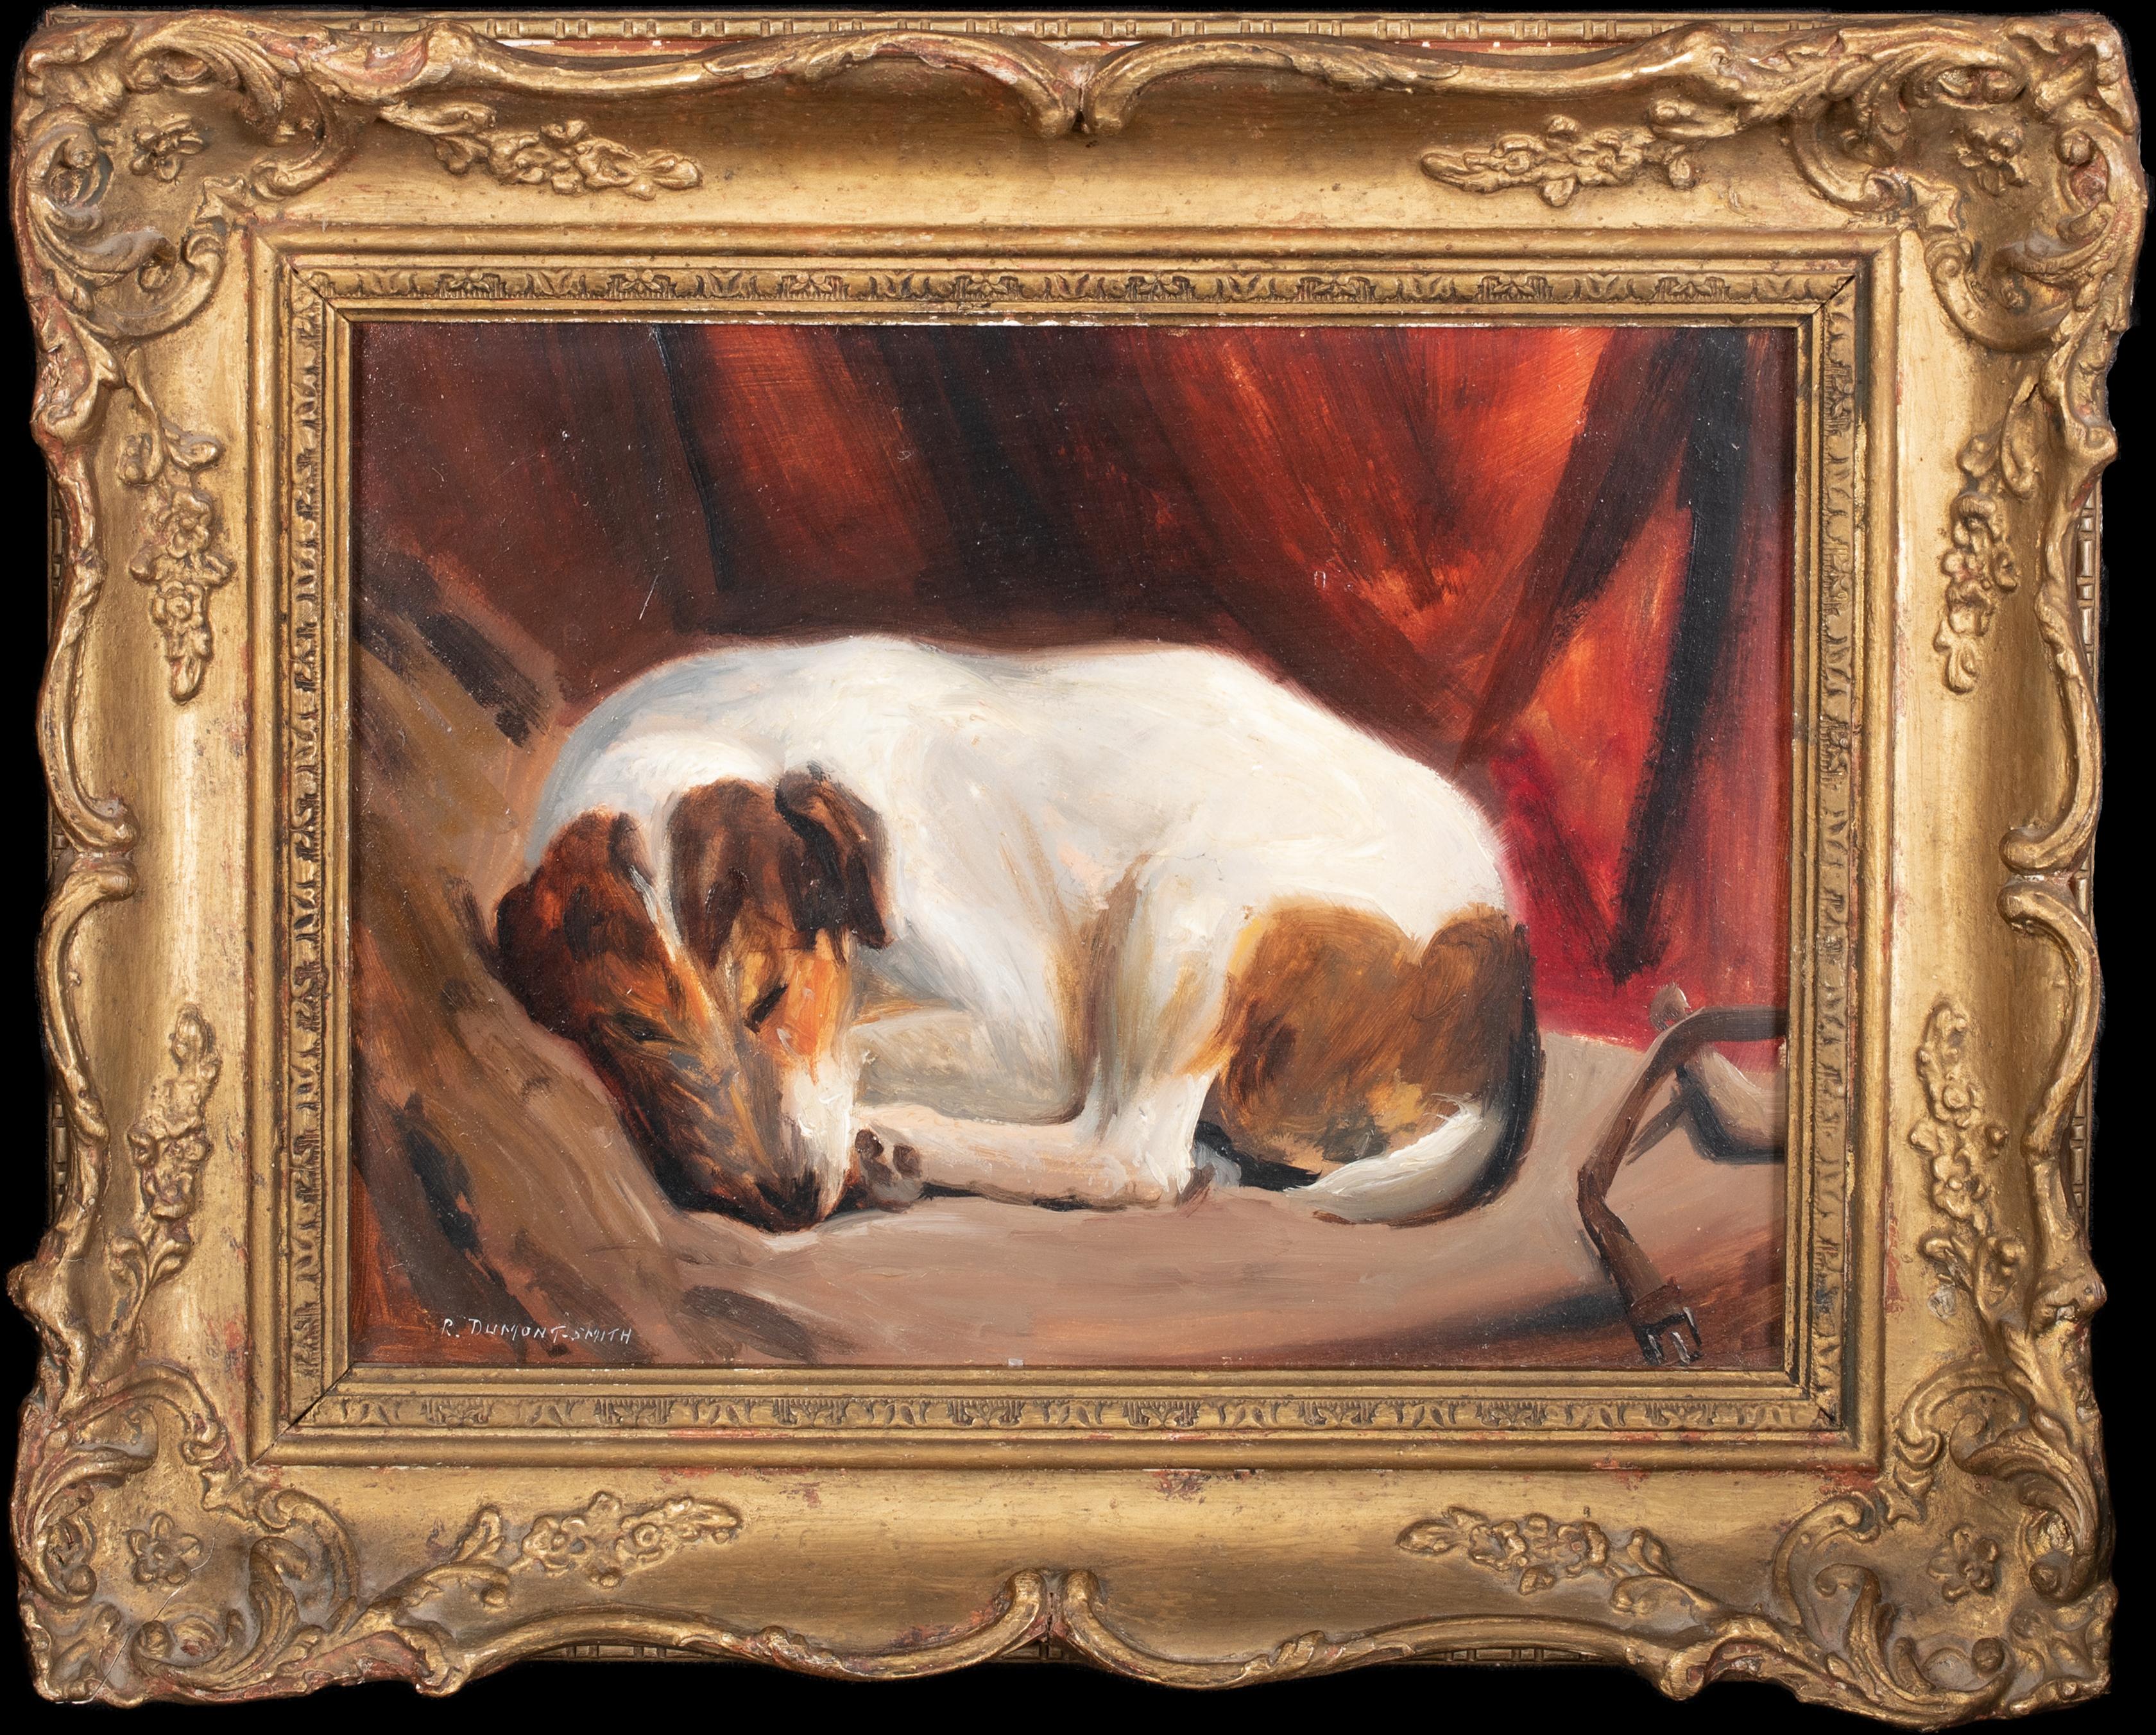 Unknown Animal Painting - Portrait Of  Sleeping Jack Russell Terrier, circa 1900  by Robert Dumont Smith  